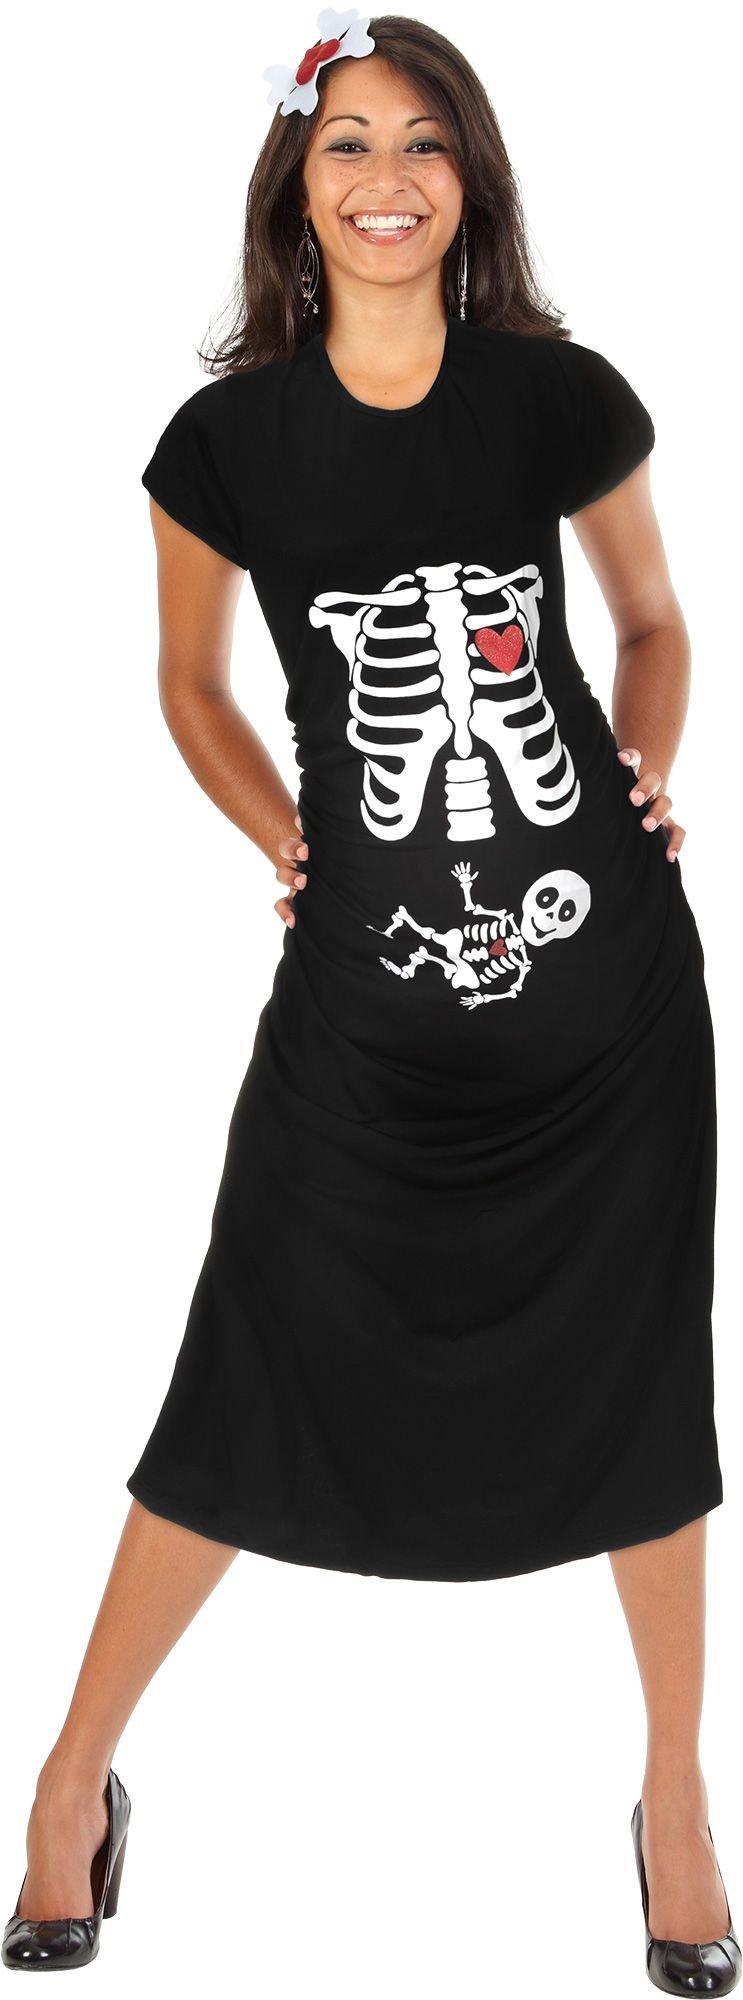 Skeleton Maternity Costume for Adults